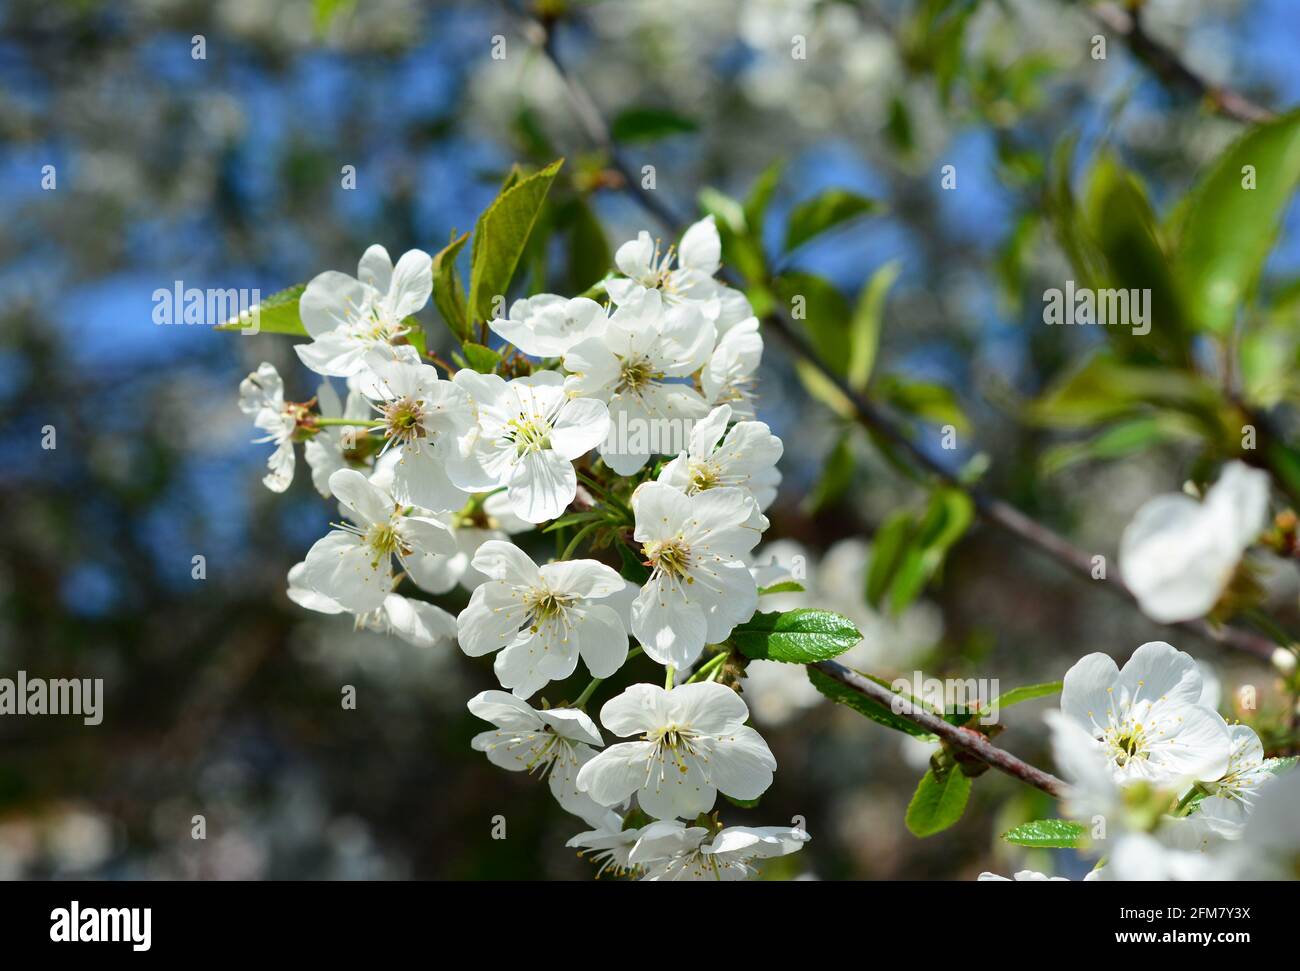 A branch of a cherry tree covered with blooming white tiny cherry flowers. Delicate blossom flowers of a fruit tree in spring. Stock Photo